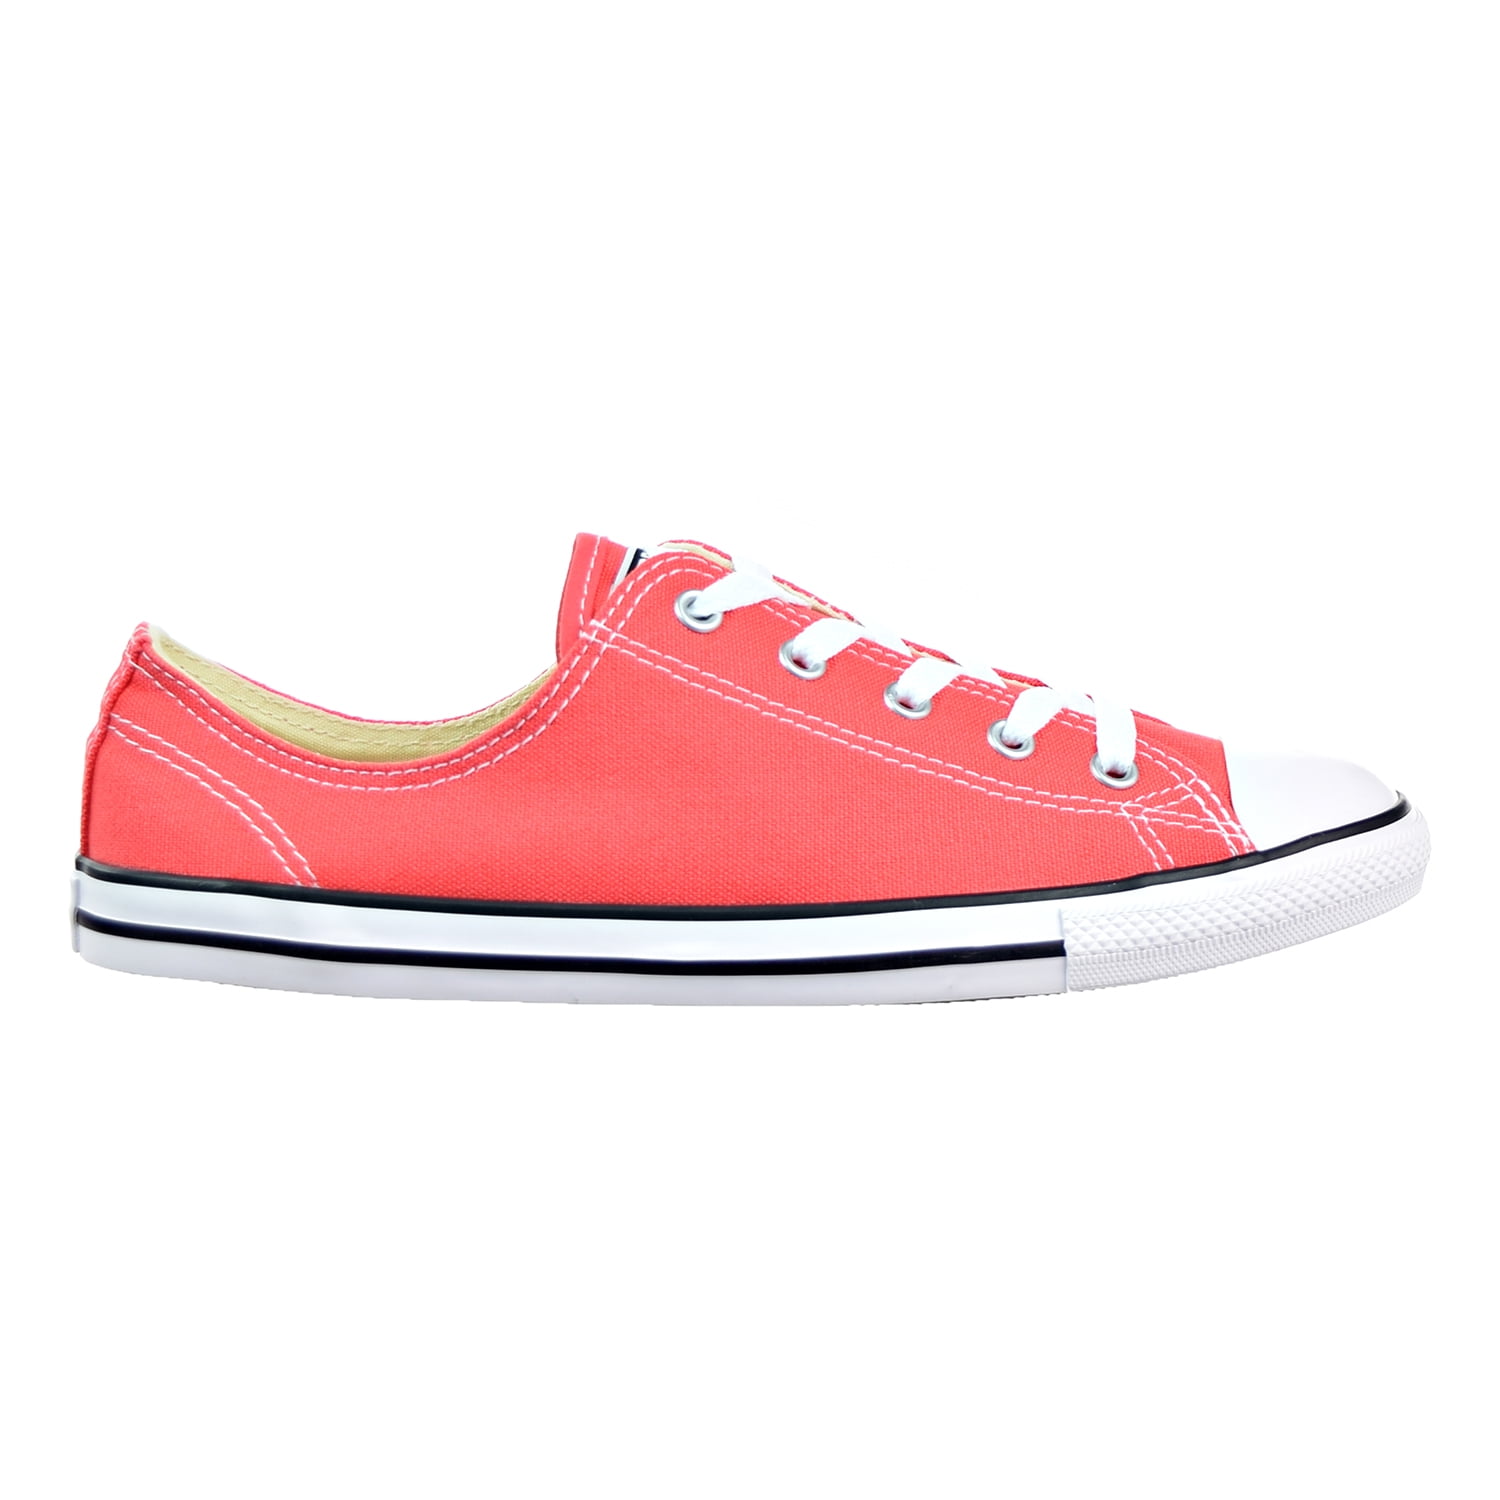 converse dainty red